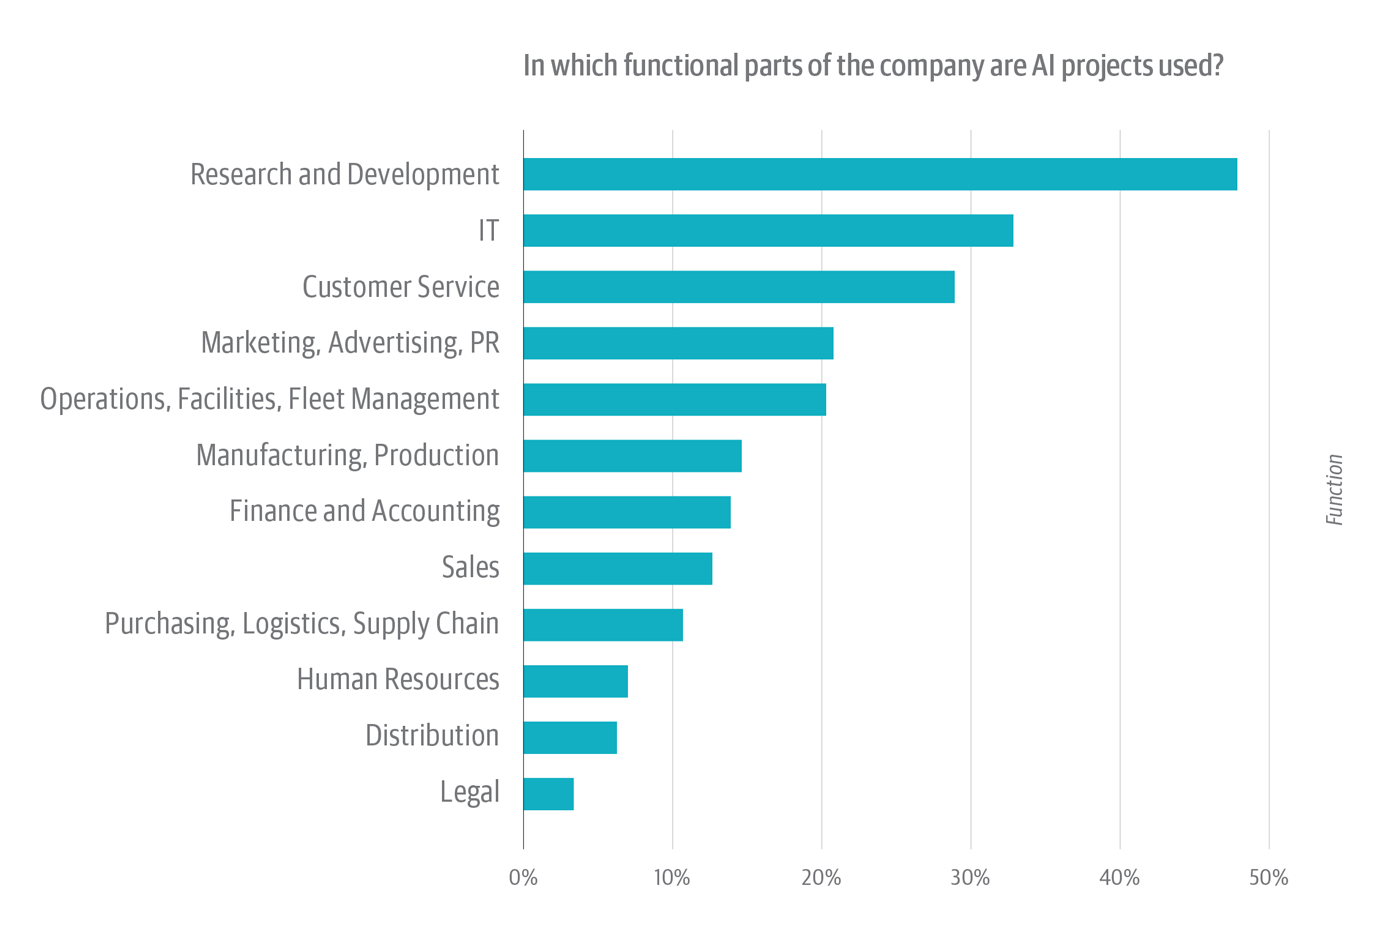 Where AI projects are being used within companies